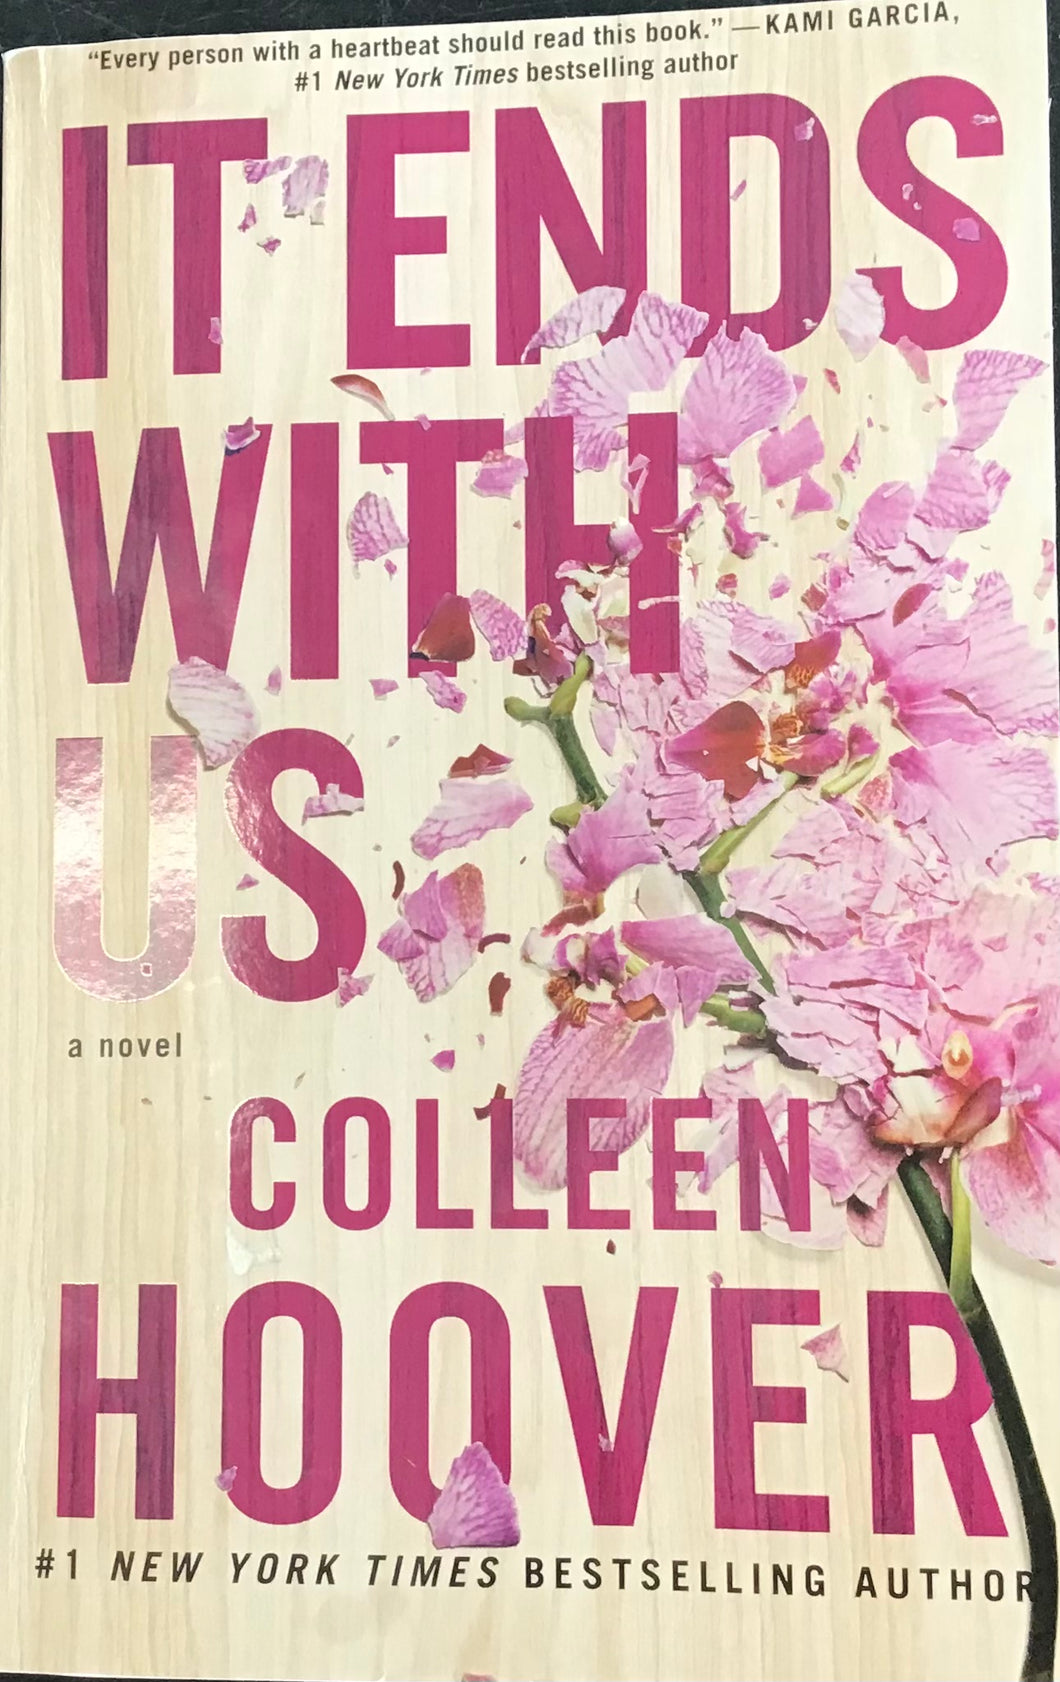 It Ends With Us, Colleen Hoover